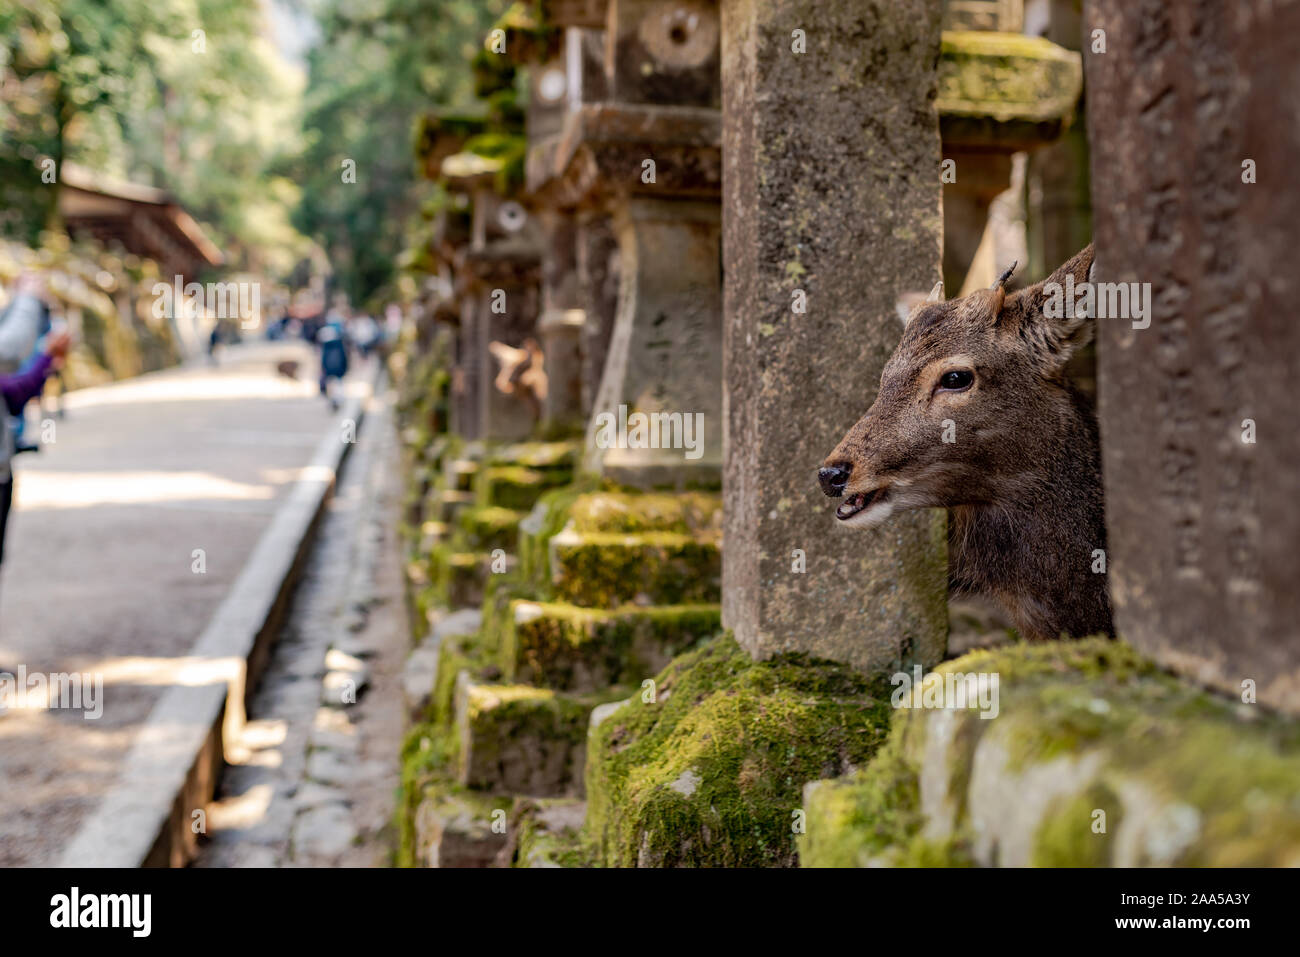 Head of a Sika deer between 2 stone monuments, taken in a sunny spring afternoon in Nara Park, Japan Stock Photo